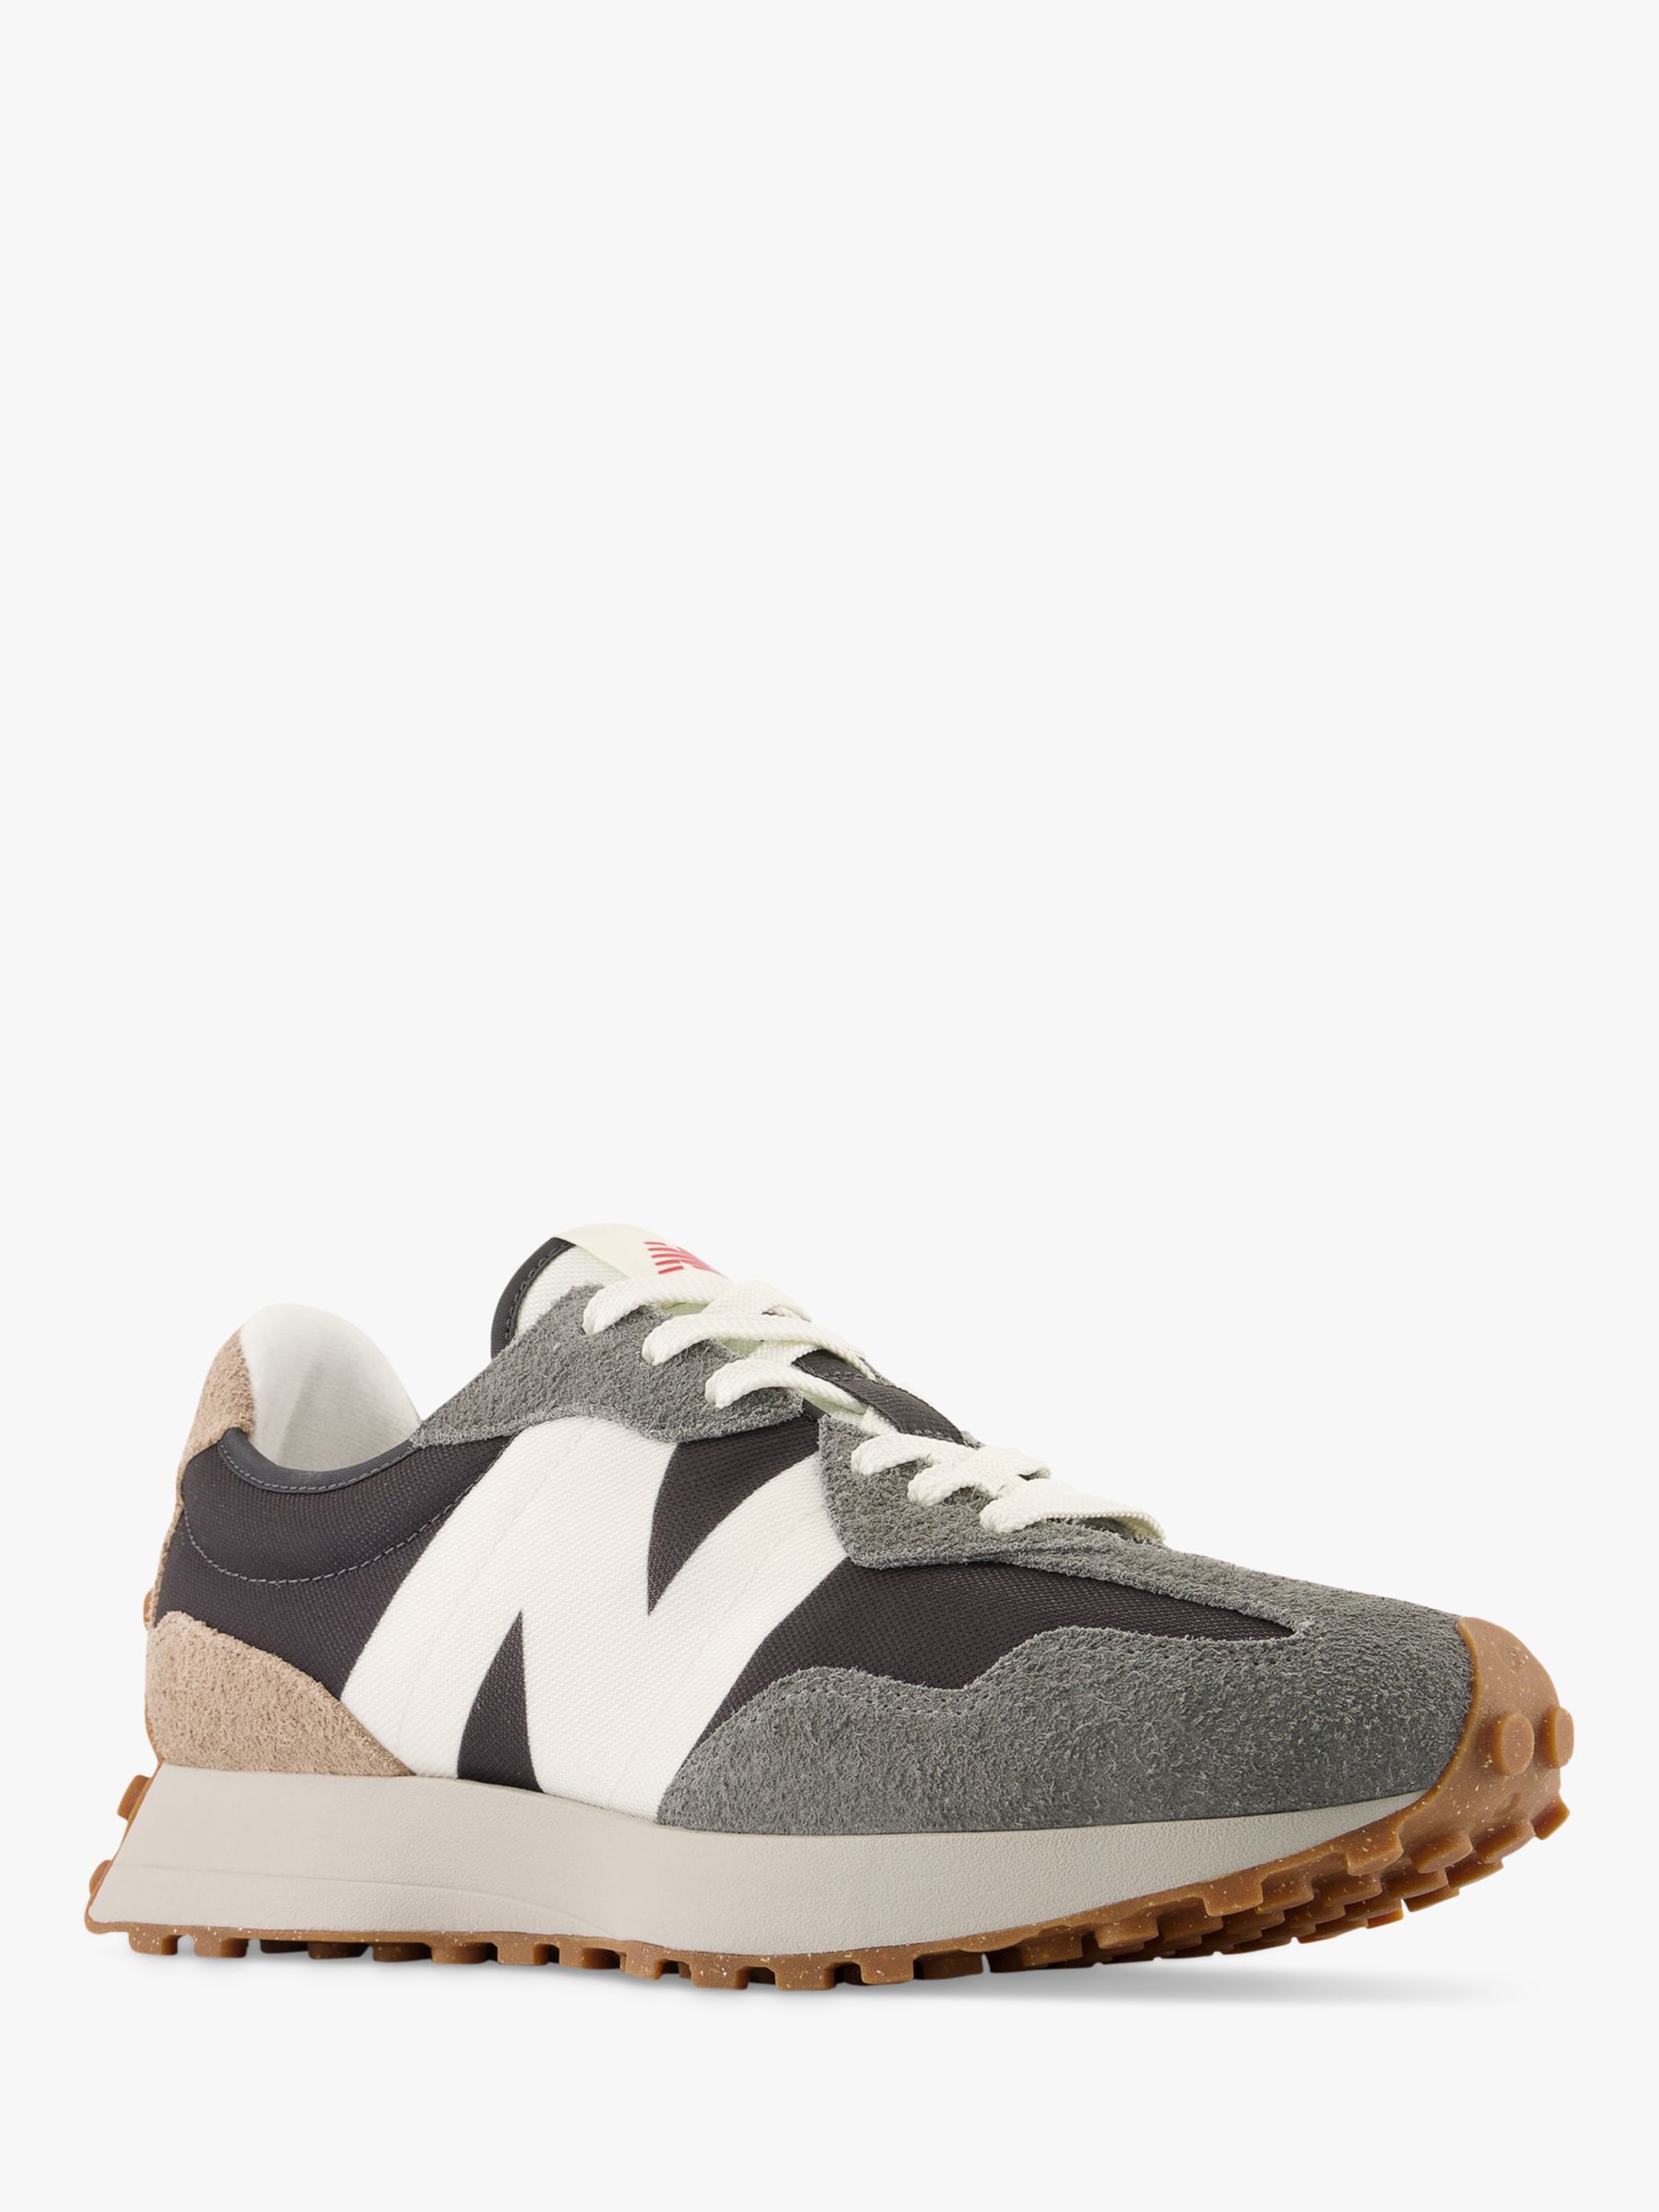 Buy New Balance 327 Retro Suede Trainers, Harbour Grey Online at johnlewis.com